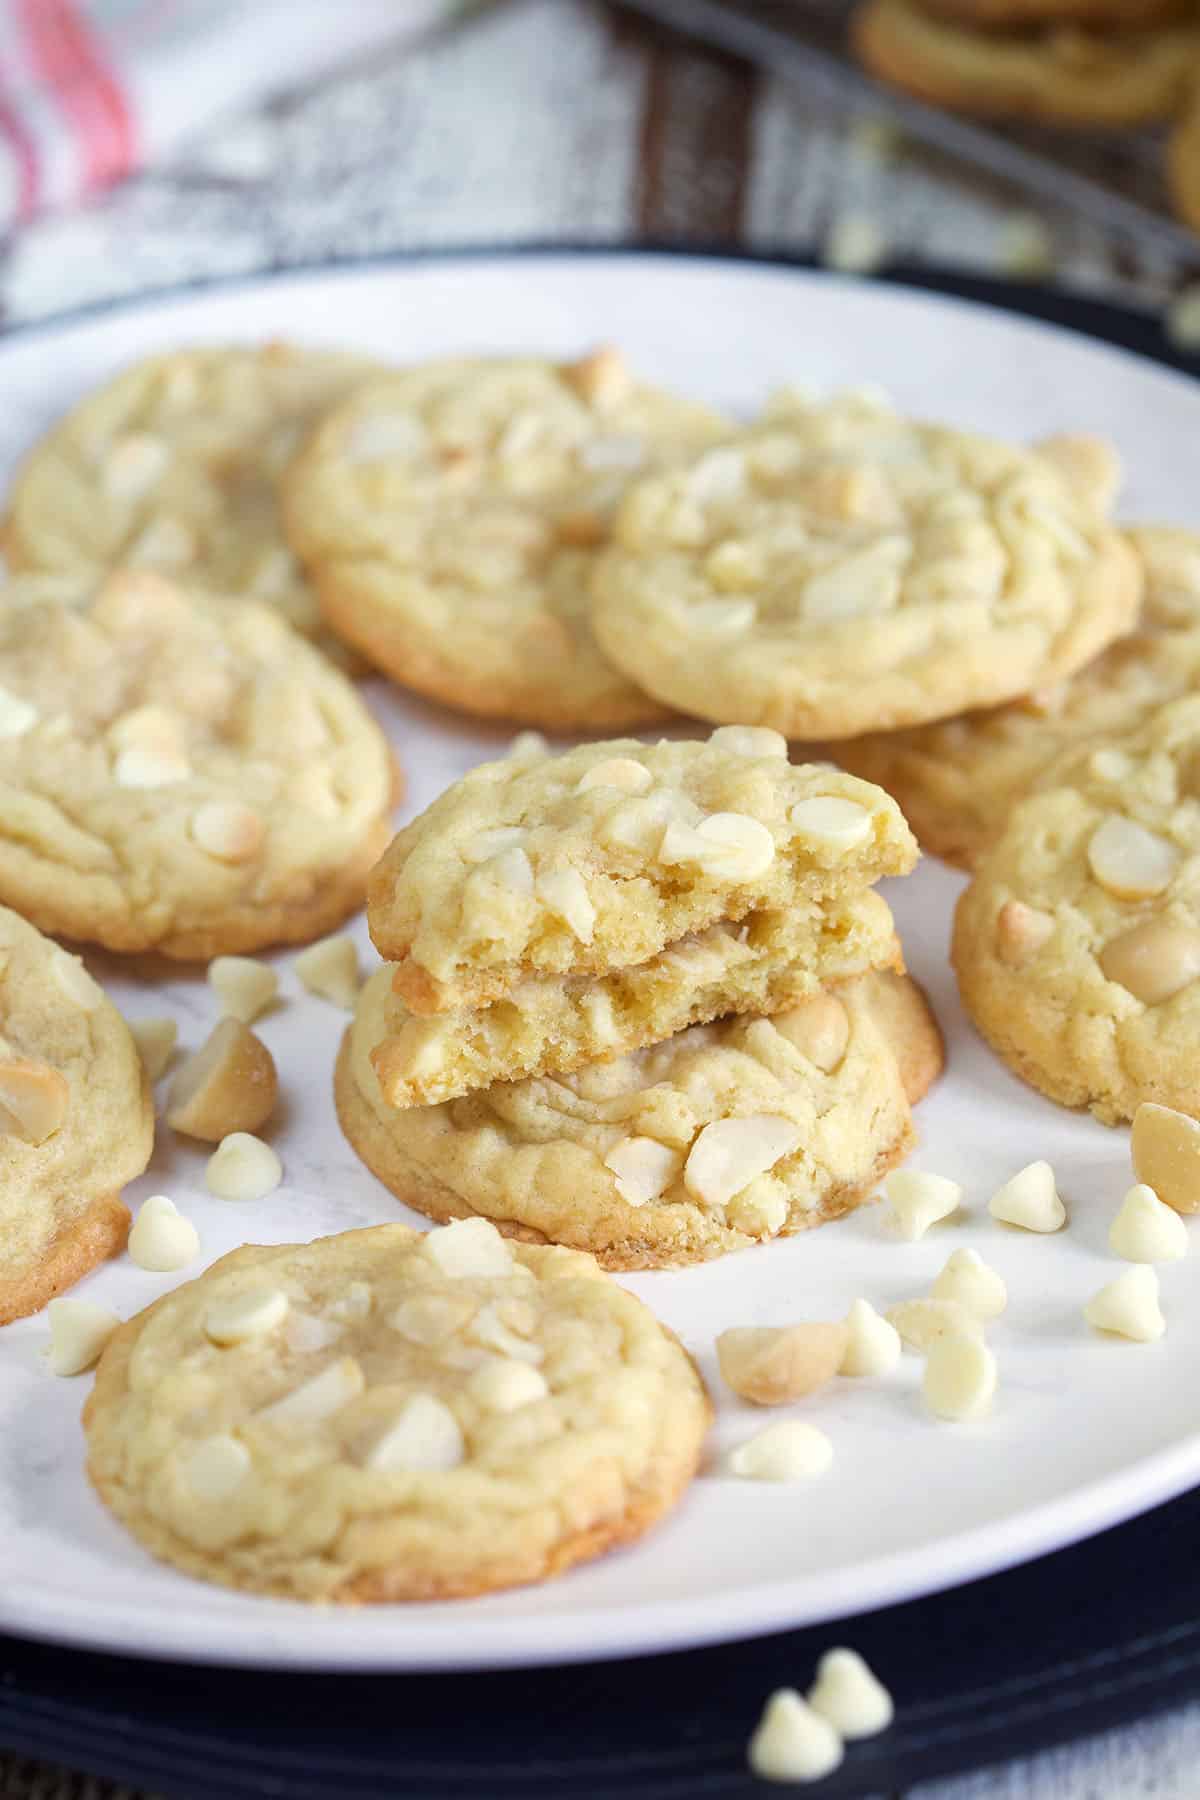 A plate of cookies is sprinkled with extra white chocolate chips.